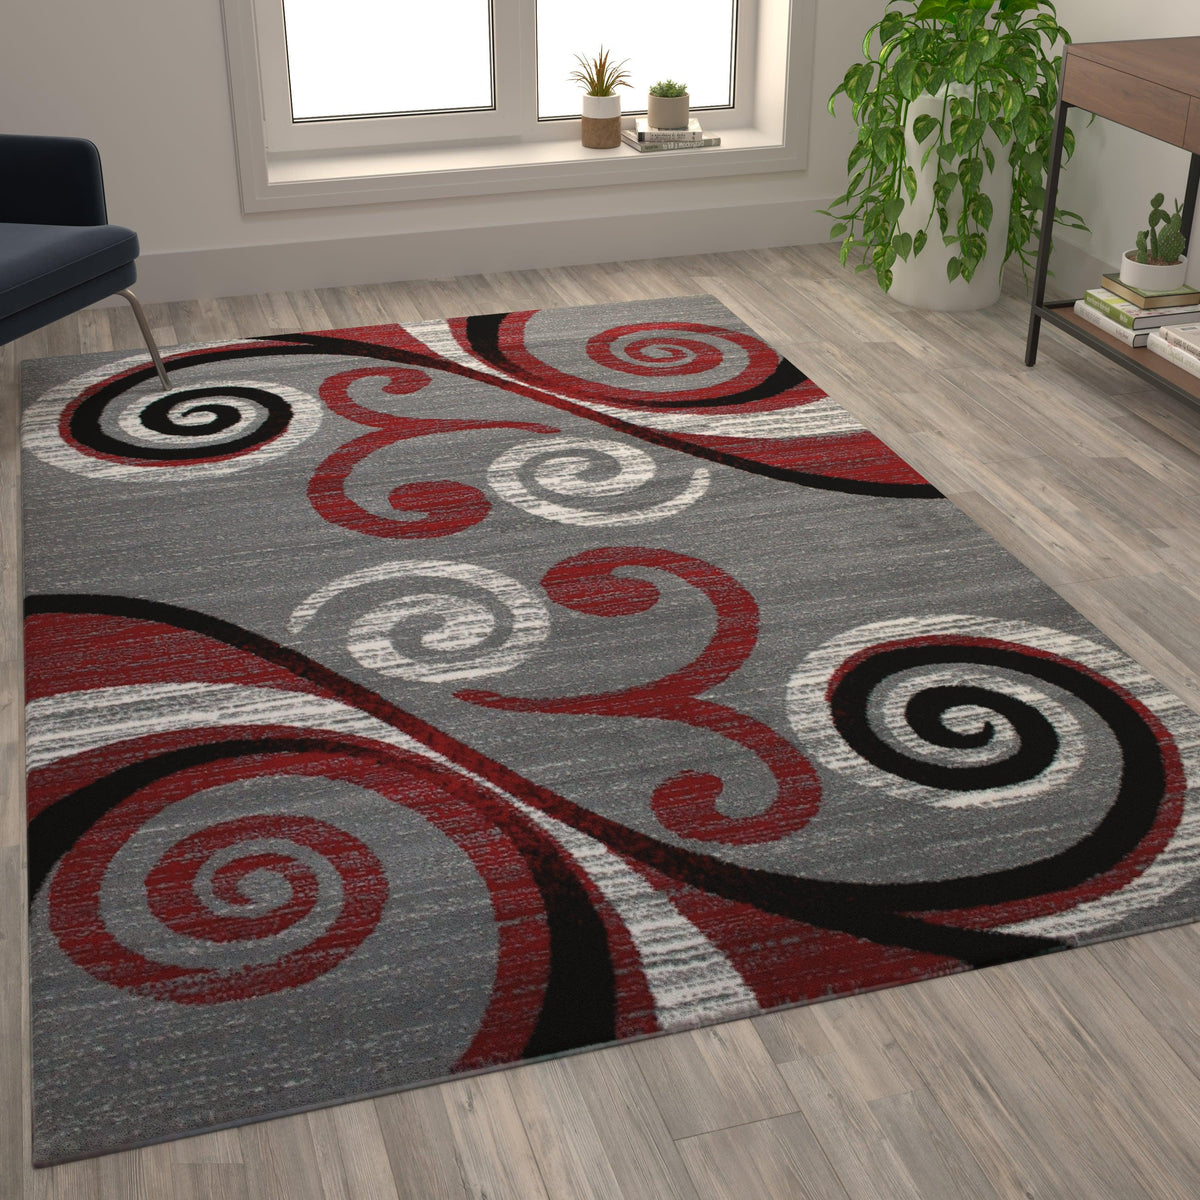 Red,6' x 9' |#| Modern Distressed Swirl Abstract Style Indoor Area Rug in Red - 6' x 9'